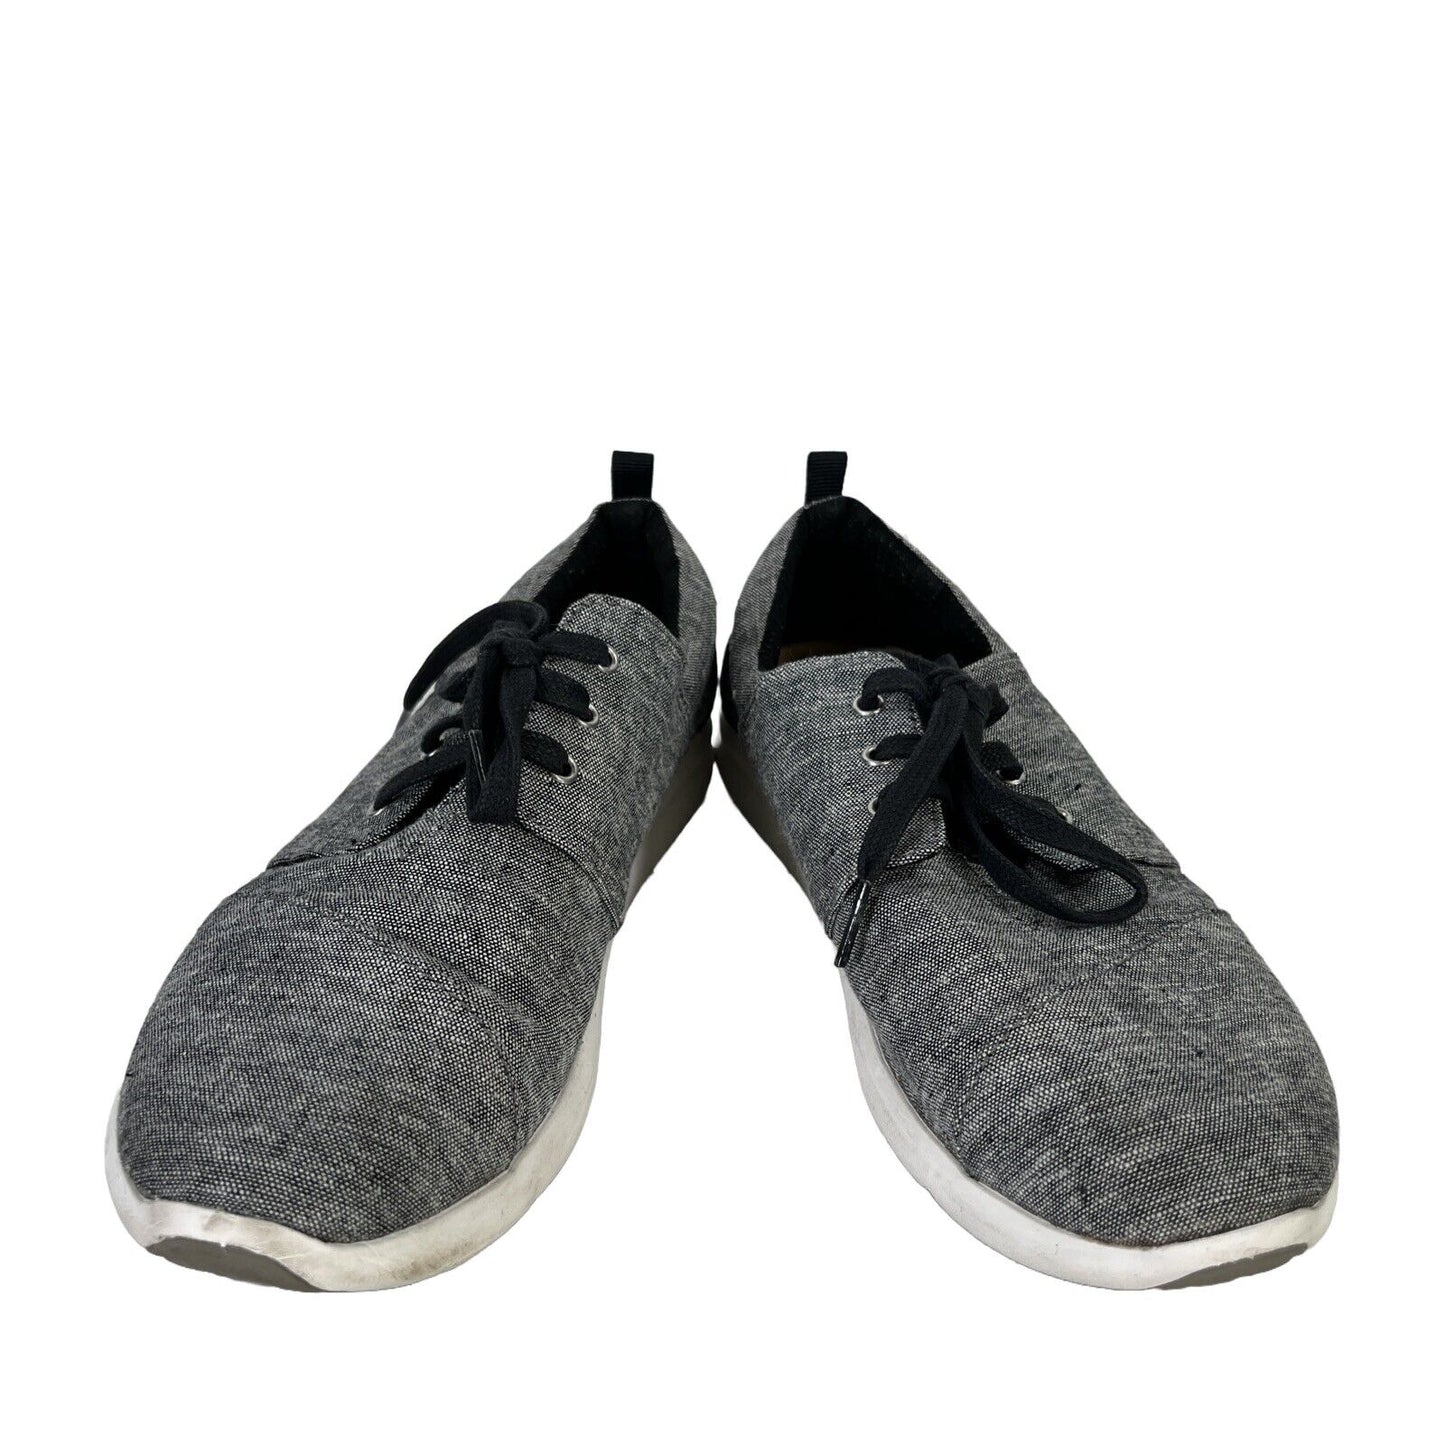 Toms Women's Gray Del Rey Lace Up Casual Sneakers - 8.5